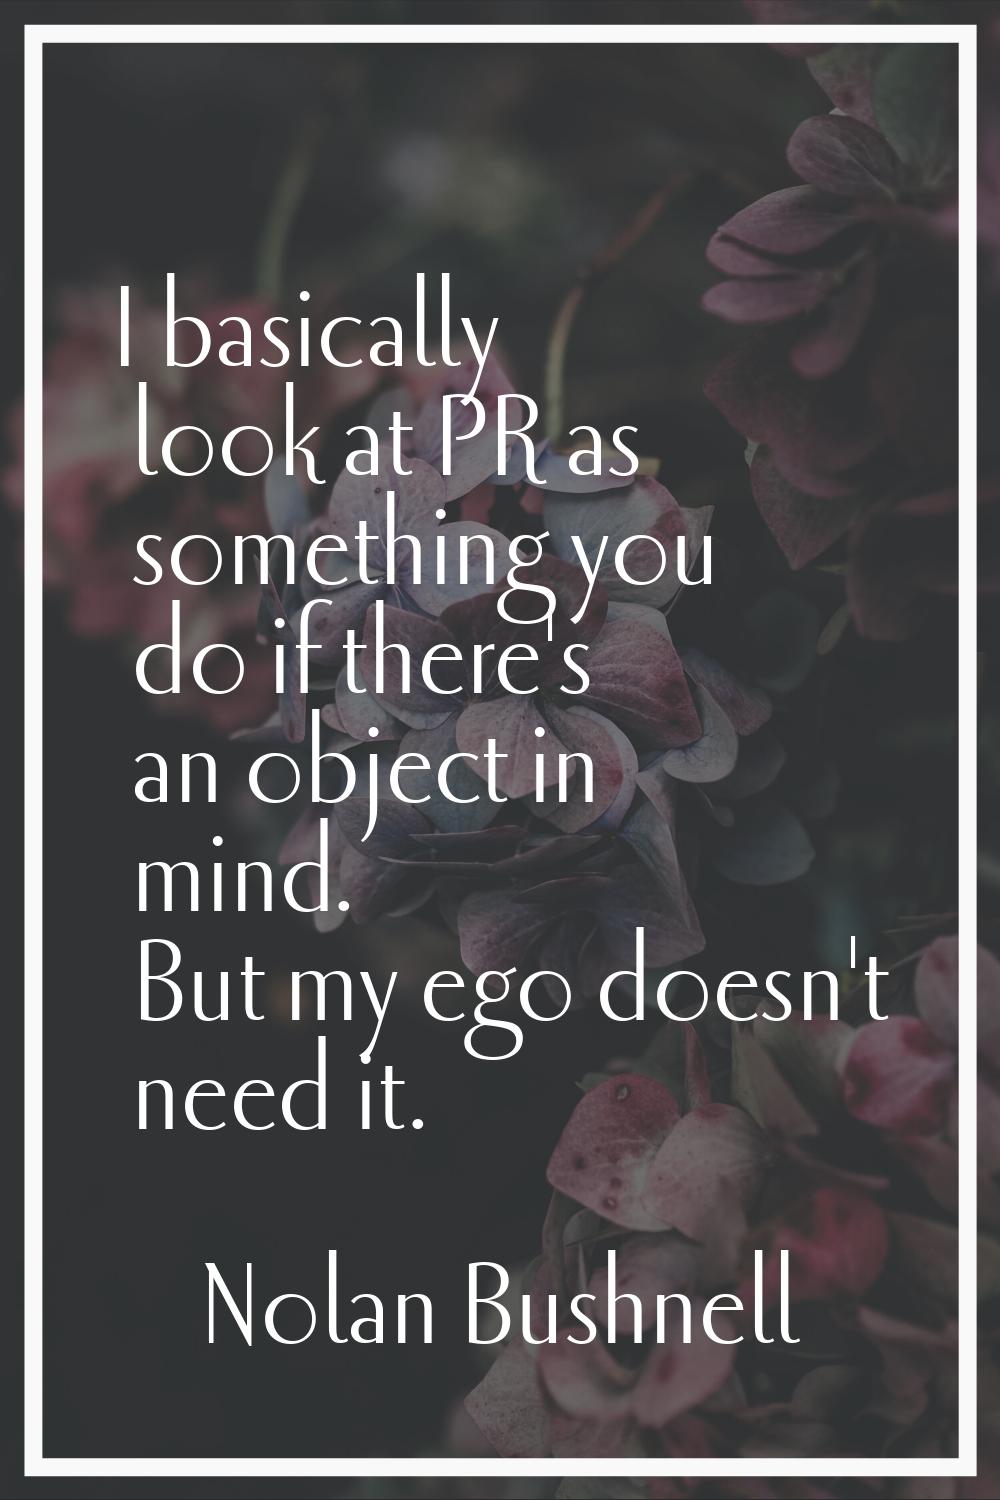 I basically look at PR as something you do if there's an object in mind. But my ego doesn't need it